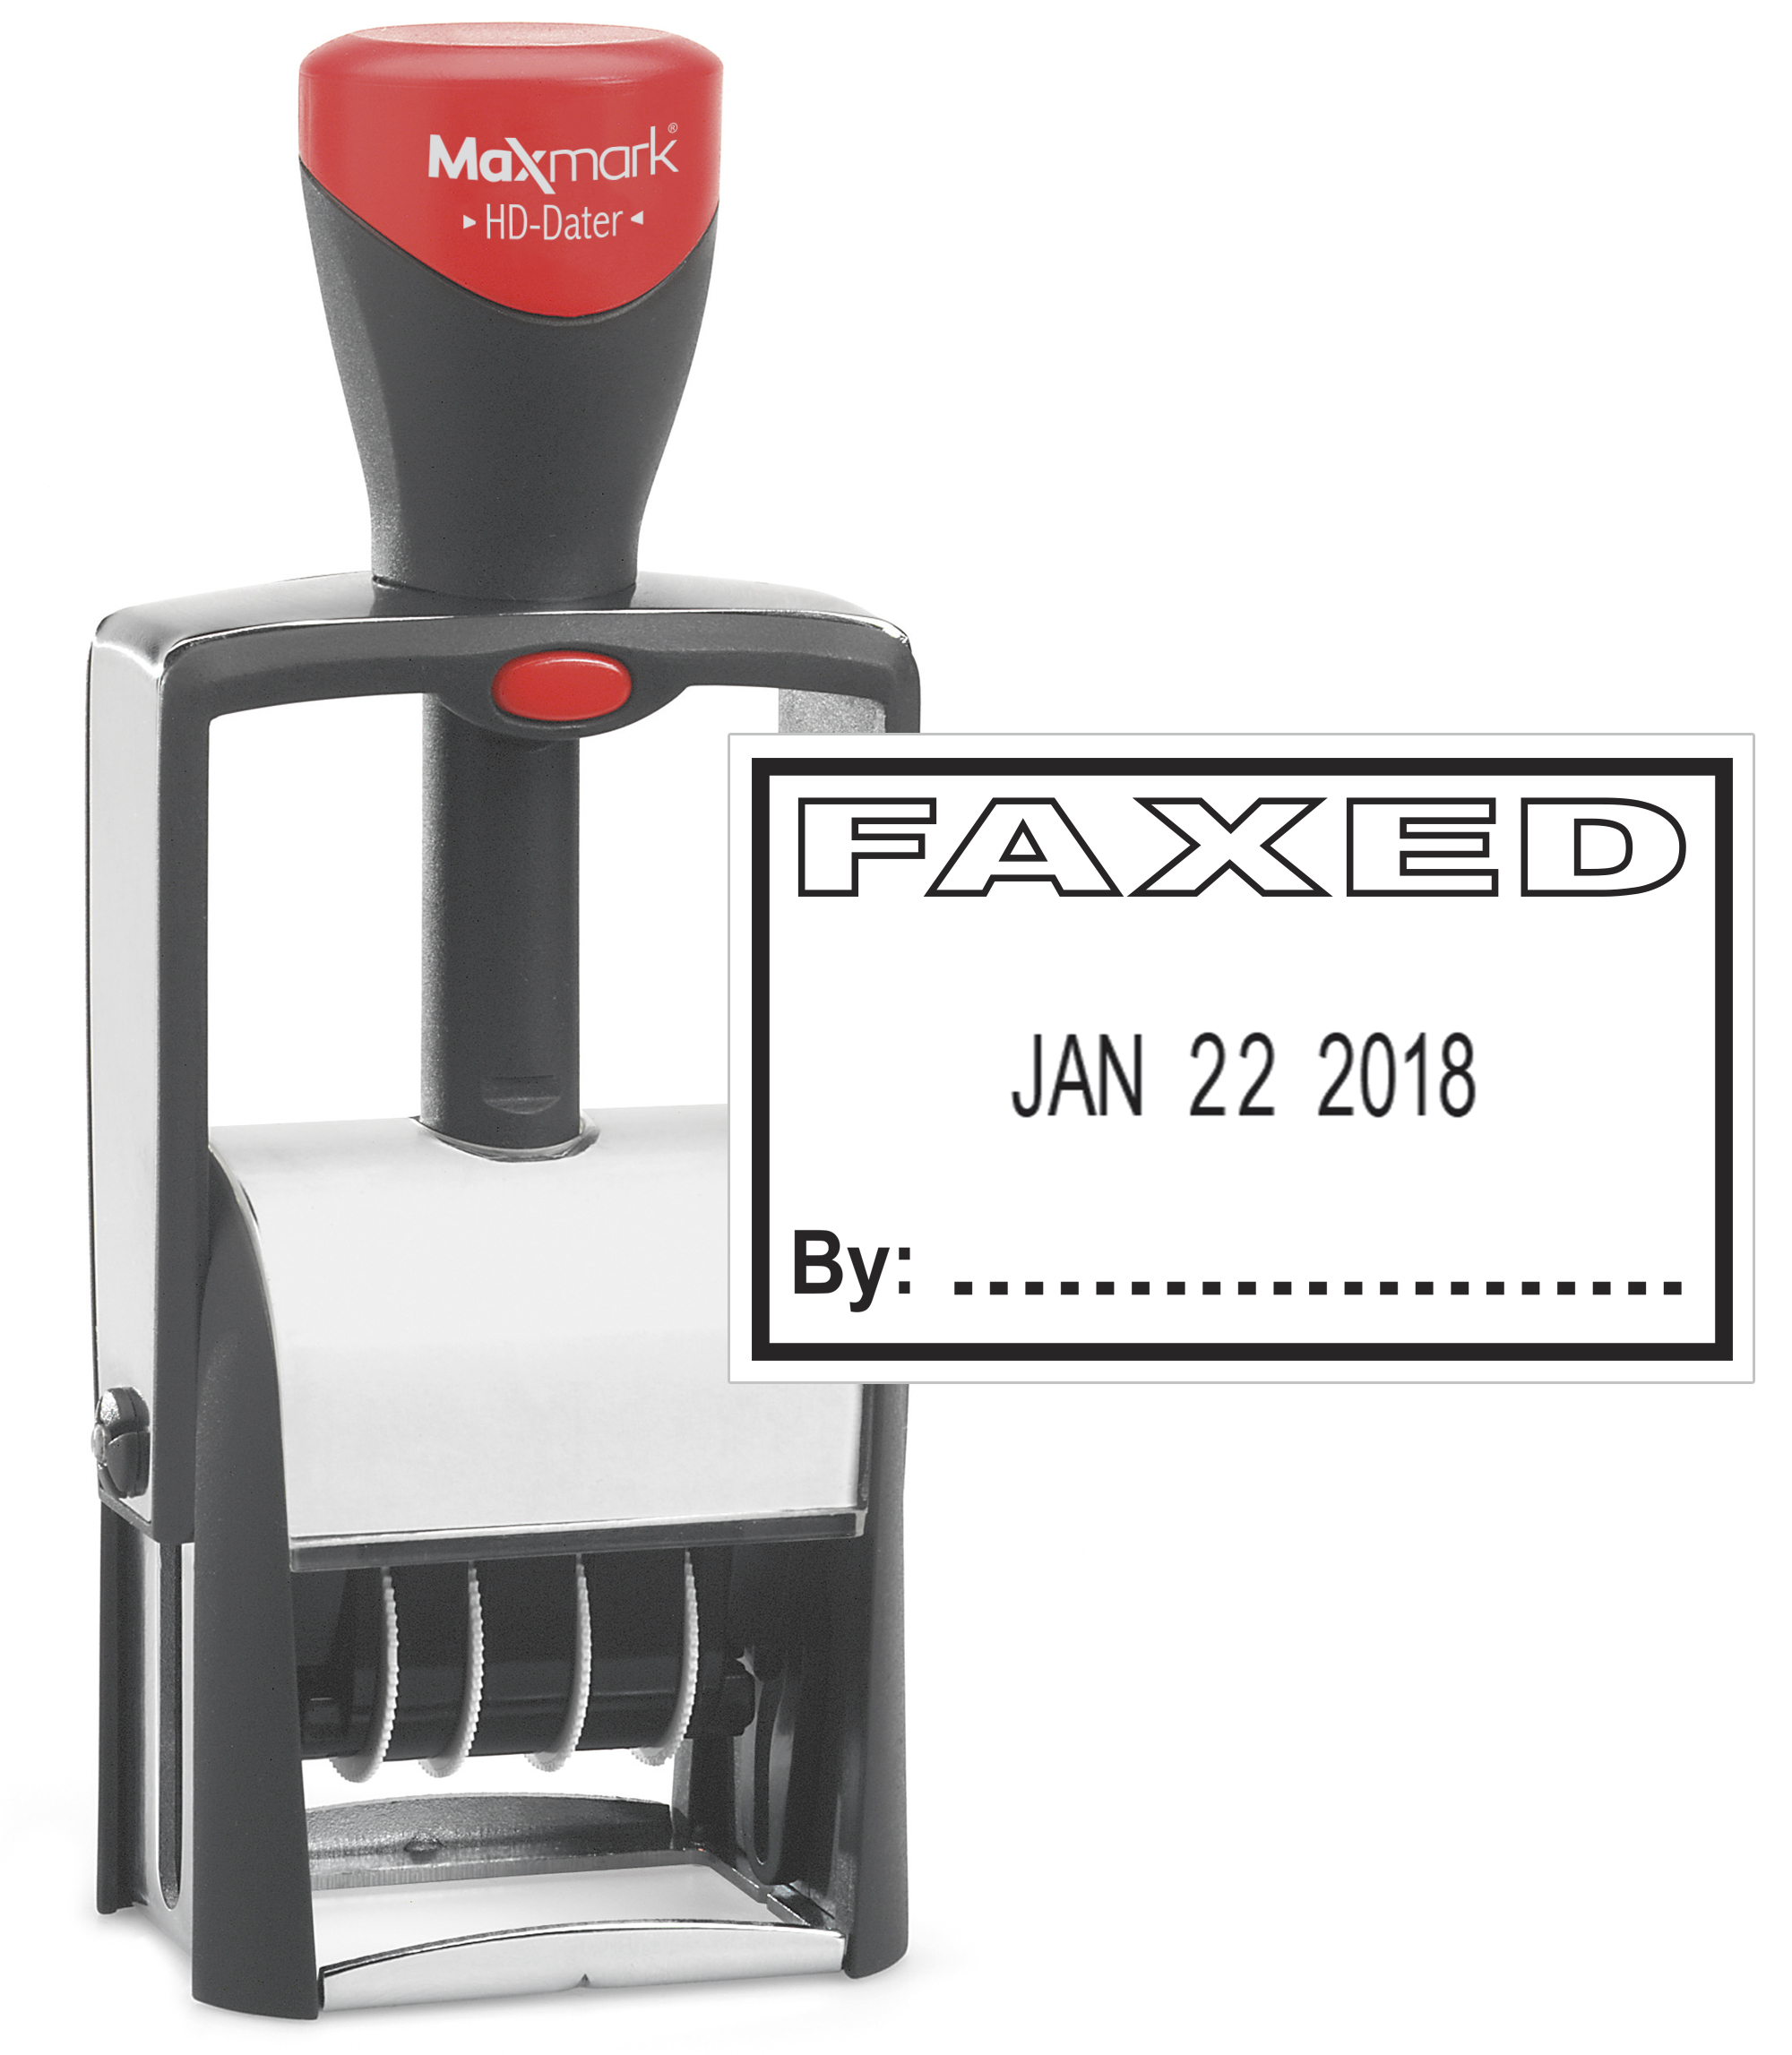 Heavy Duty Date Stamp with "FAXED" Self Inking Stamp - BLACK Ink